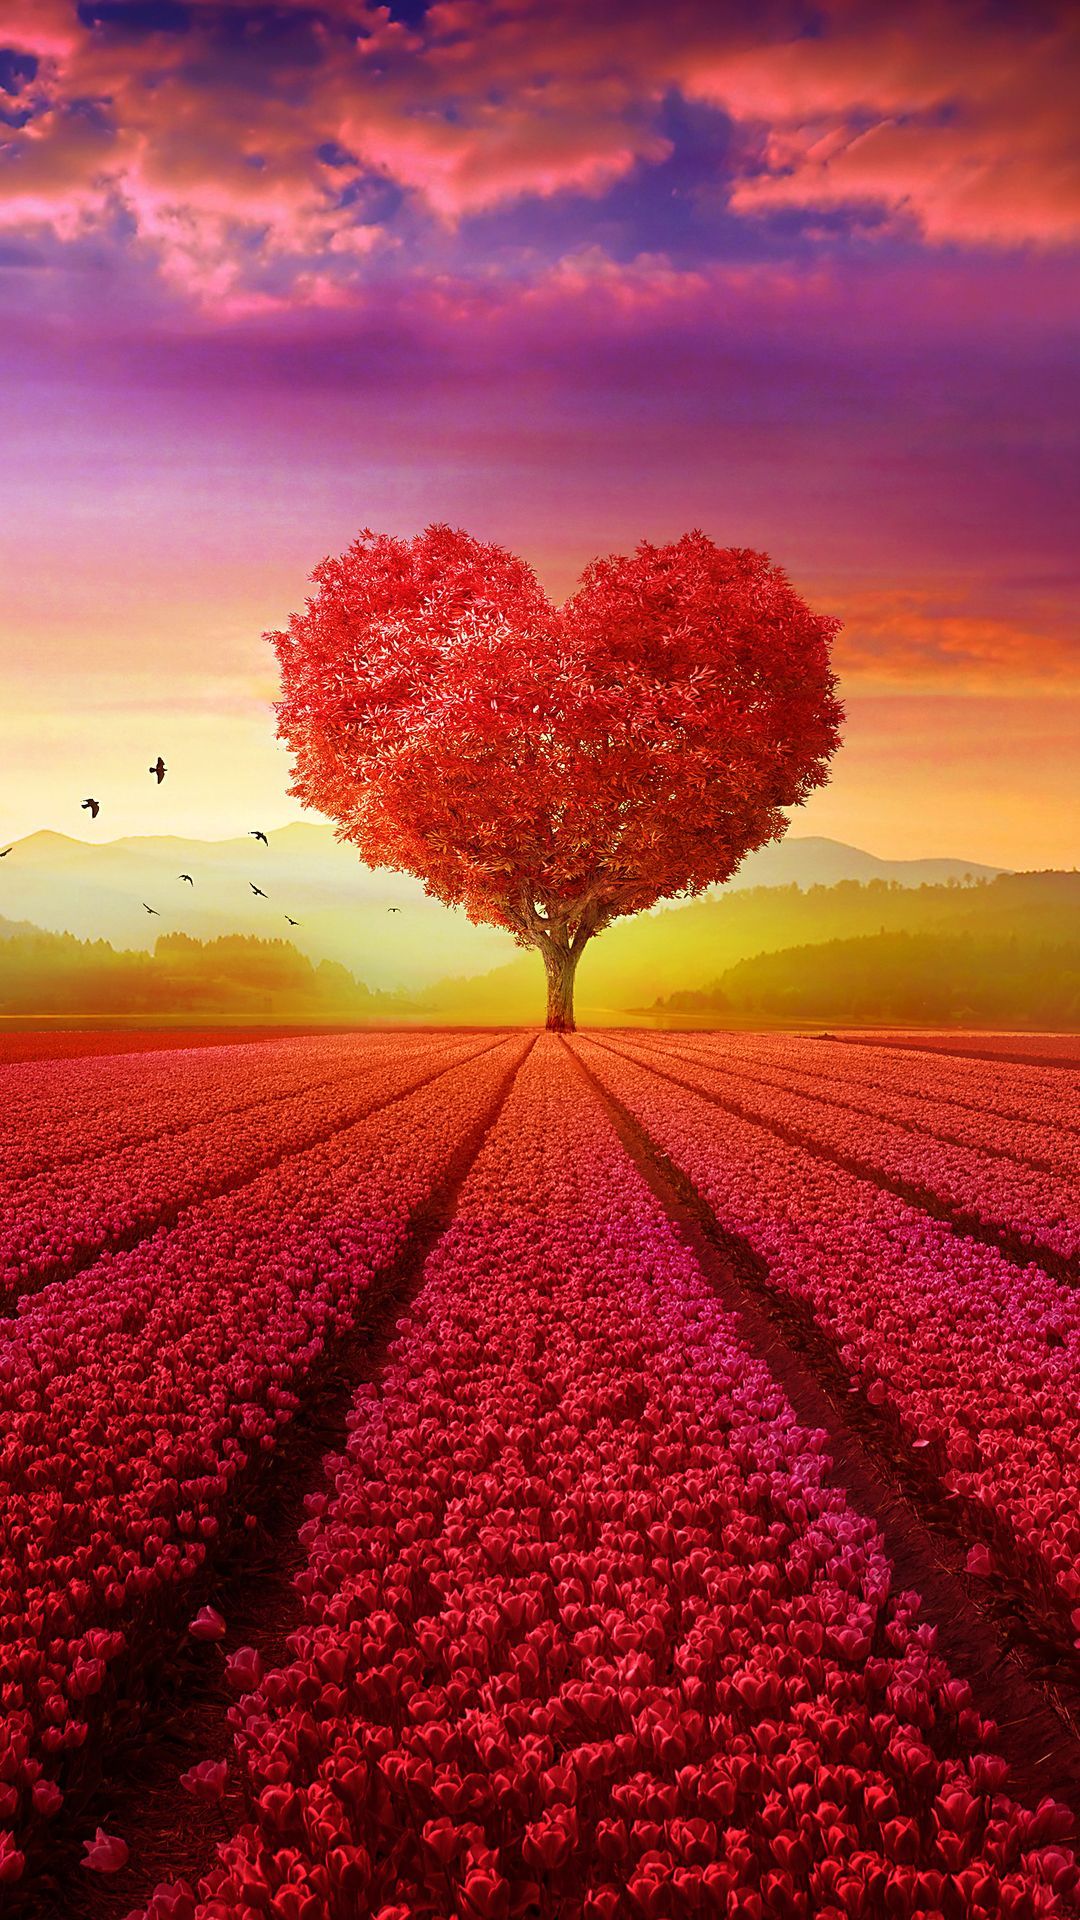 Red Heart Tree Wallpapers